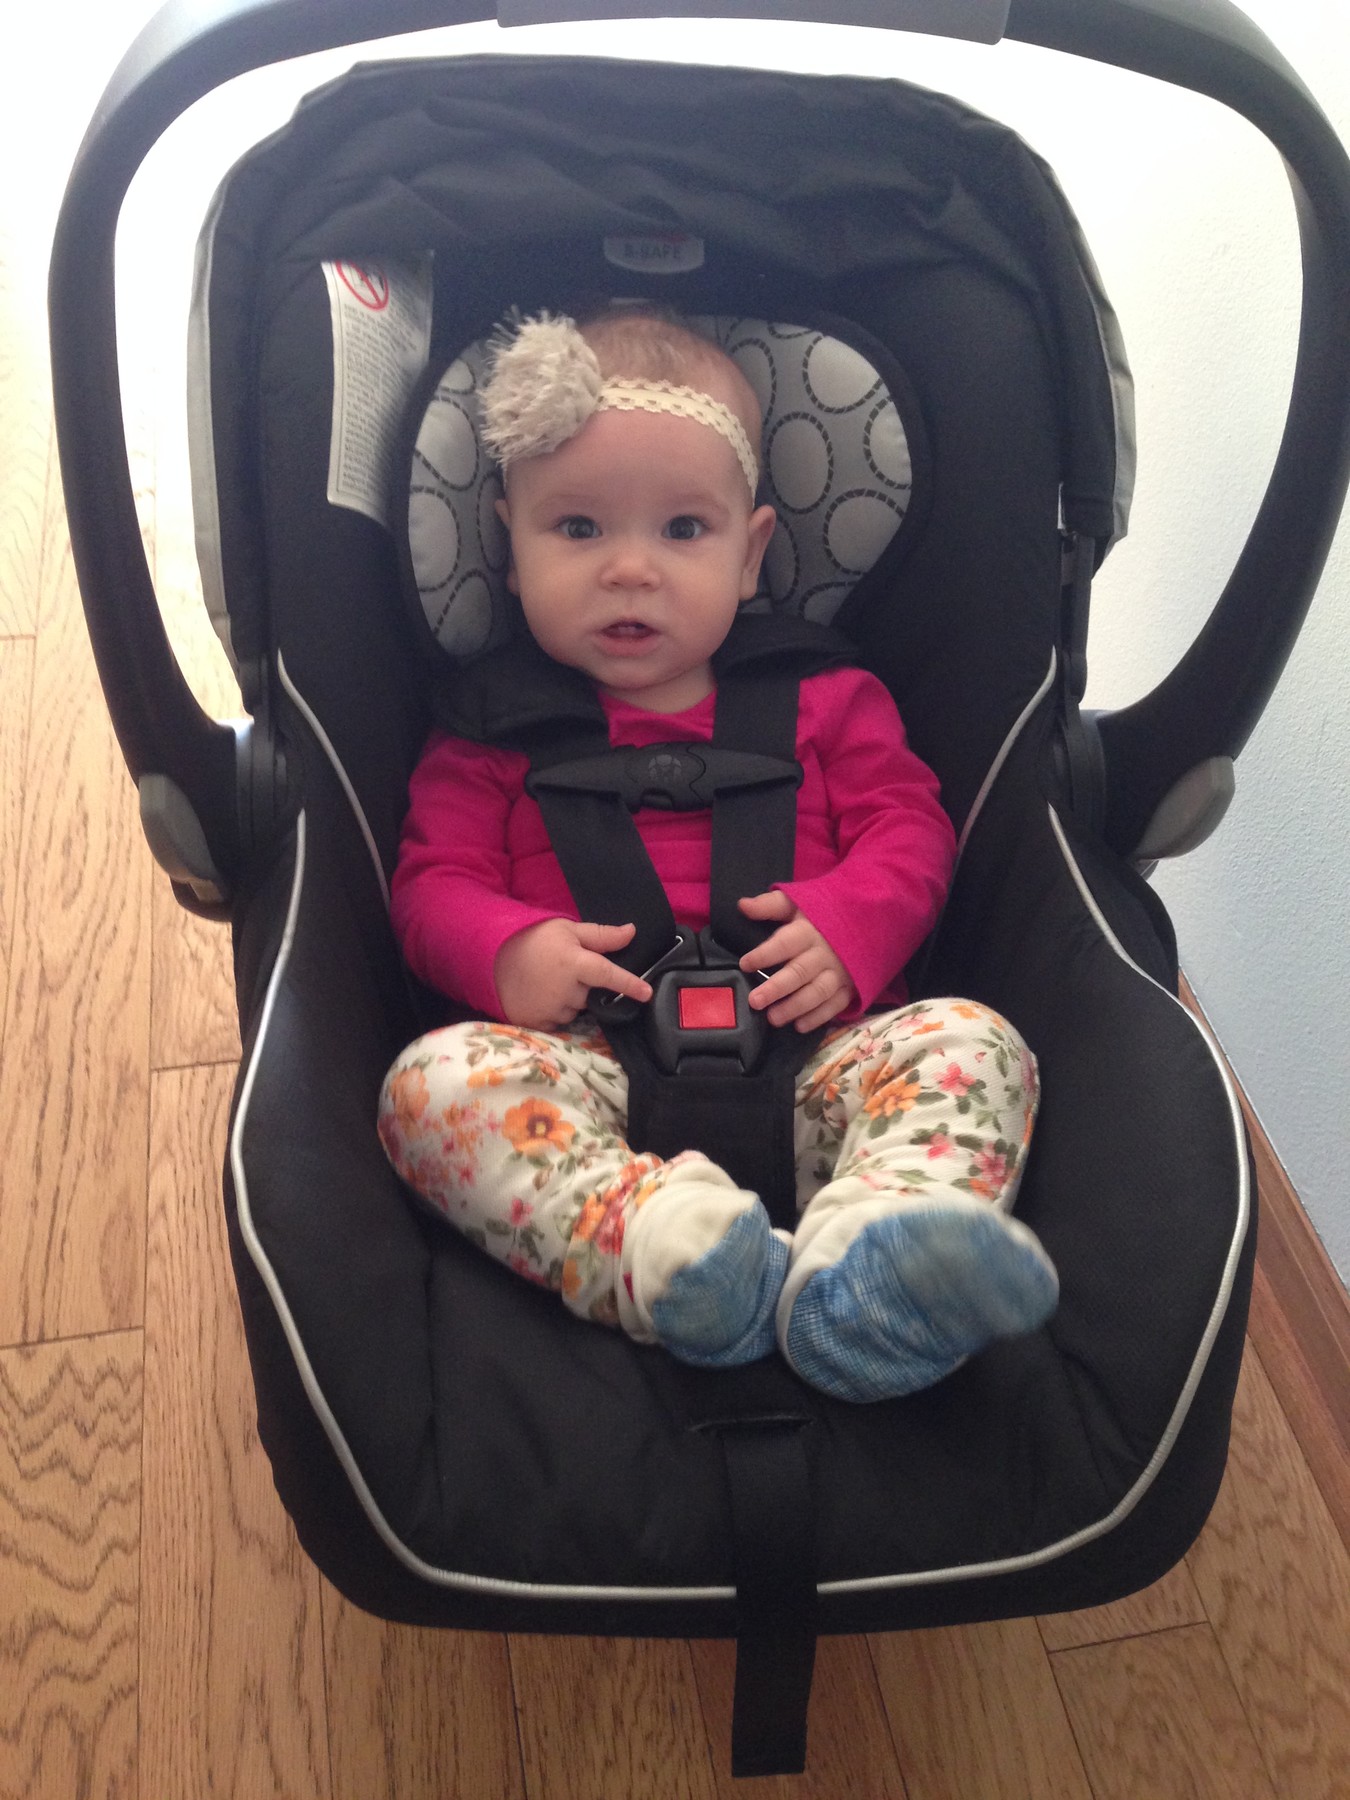 Going in her Car Seat